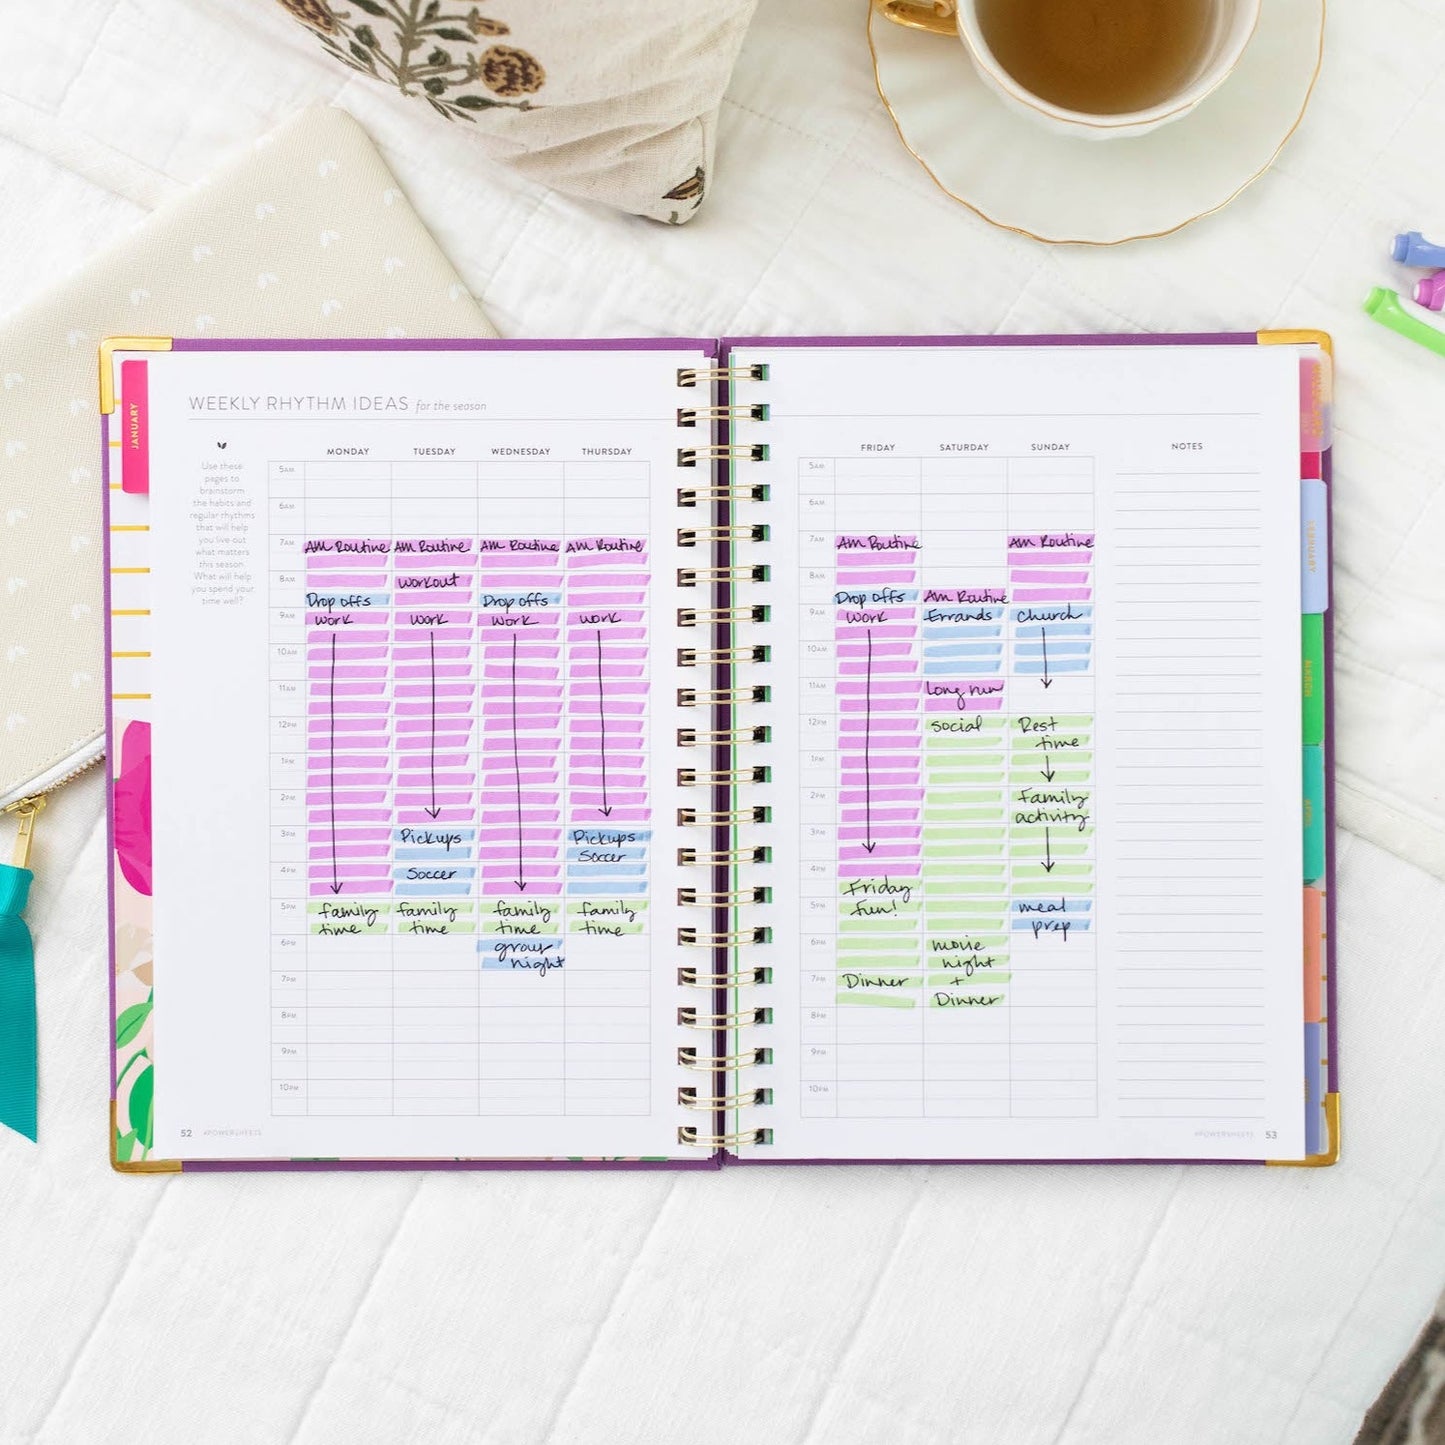 2024 One-Year PowerSheets® Goal Planner| Perennial